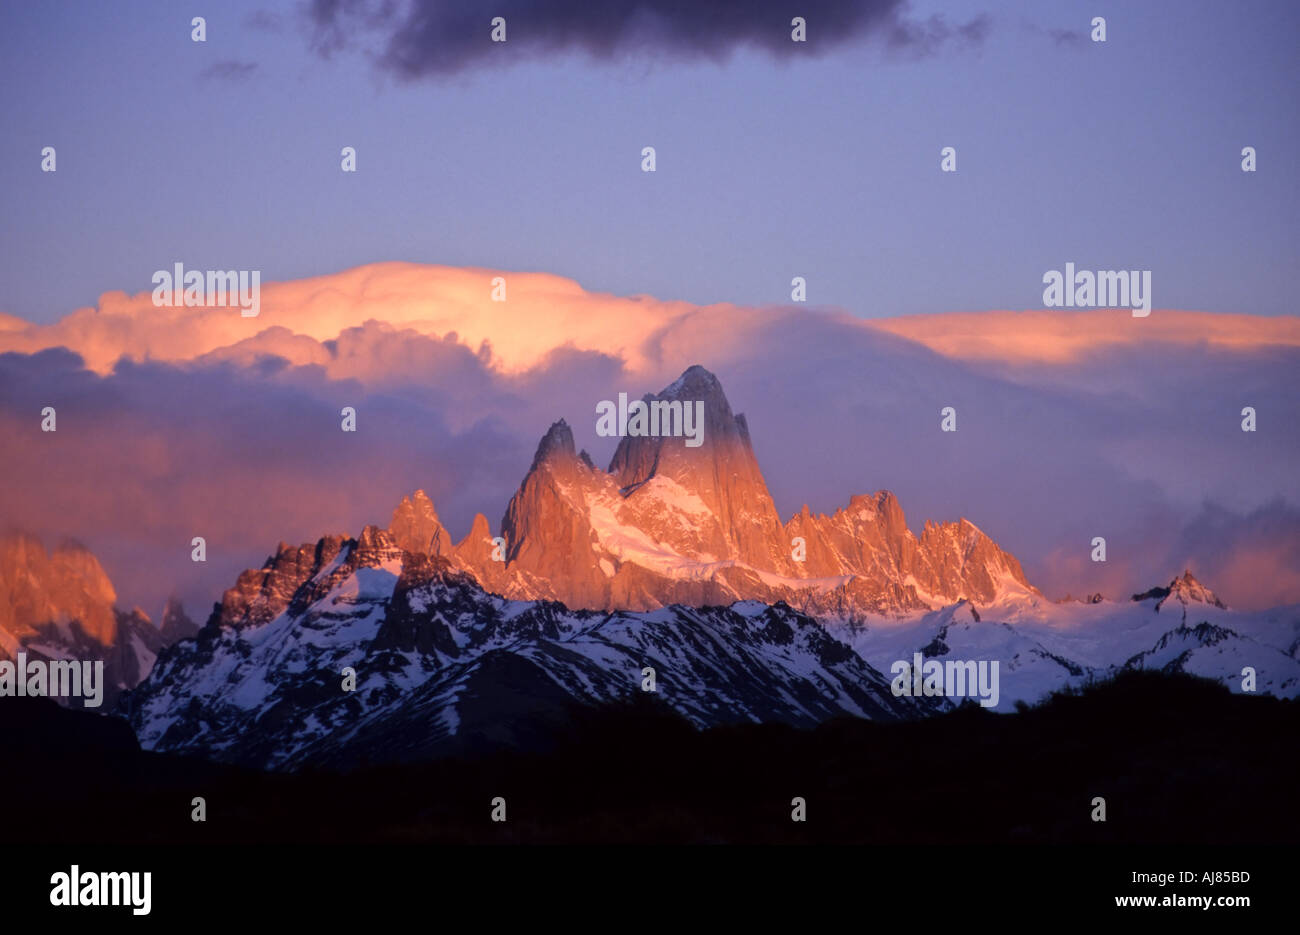 Mt Fitz Roy at dawn, known as the Sunrise of Fire, Parque Nacional los Glaciares, Patagonia, Argentina Stock Photo